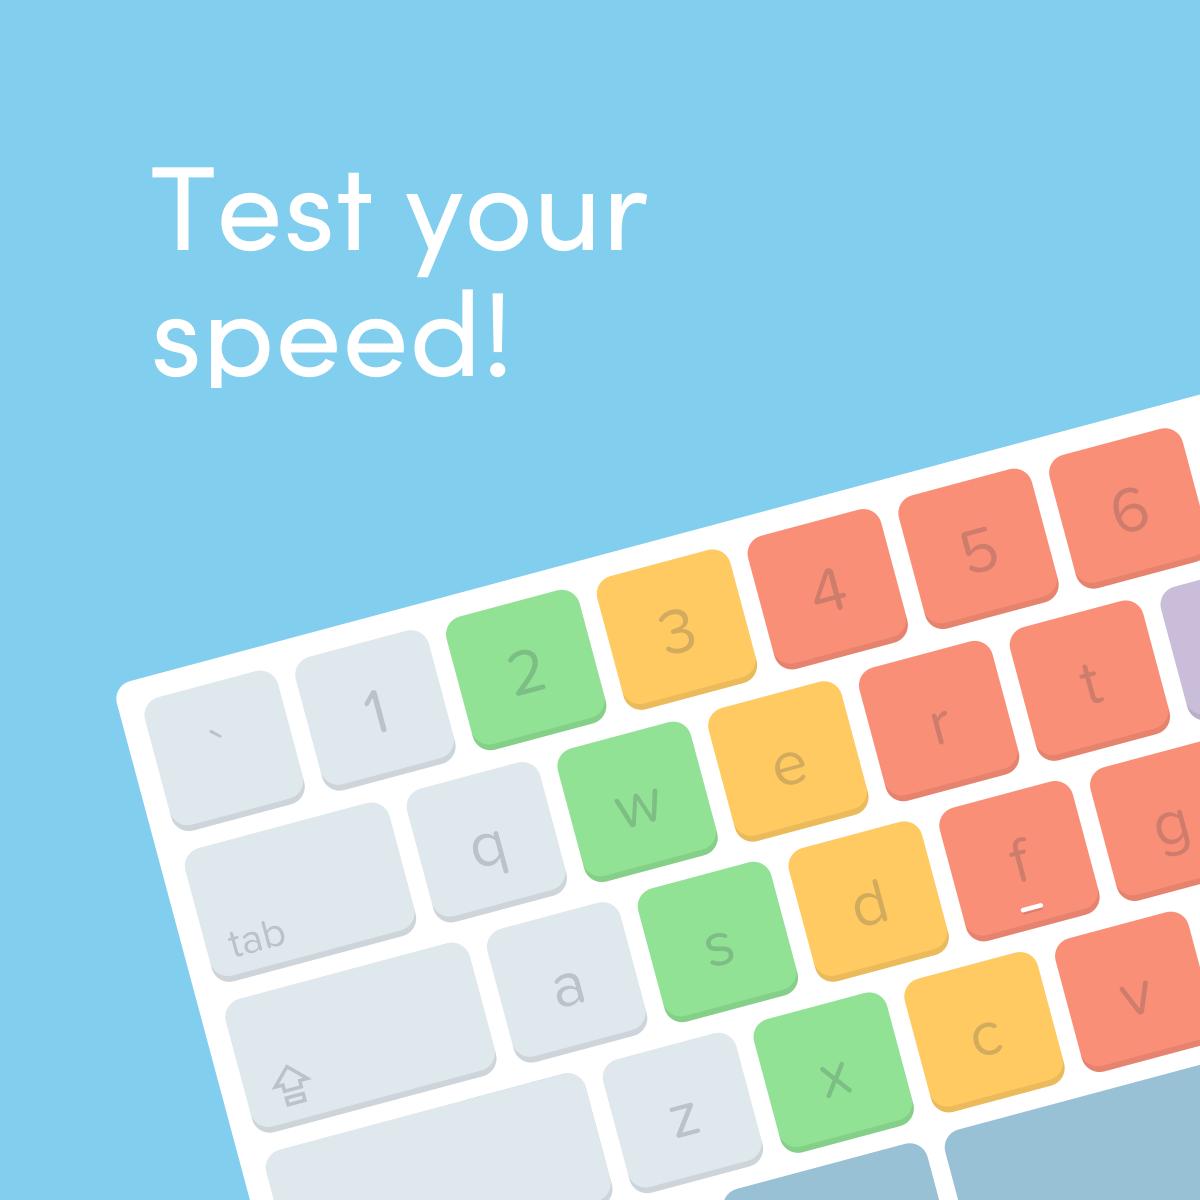 Typing Master - Learn To Type & Test Your Skills